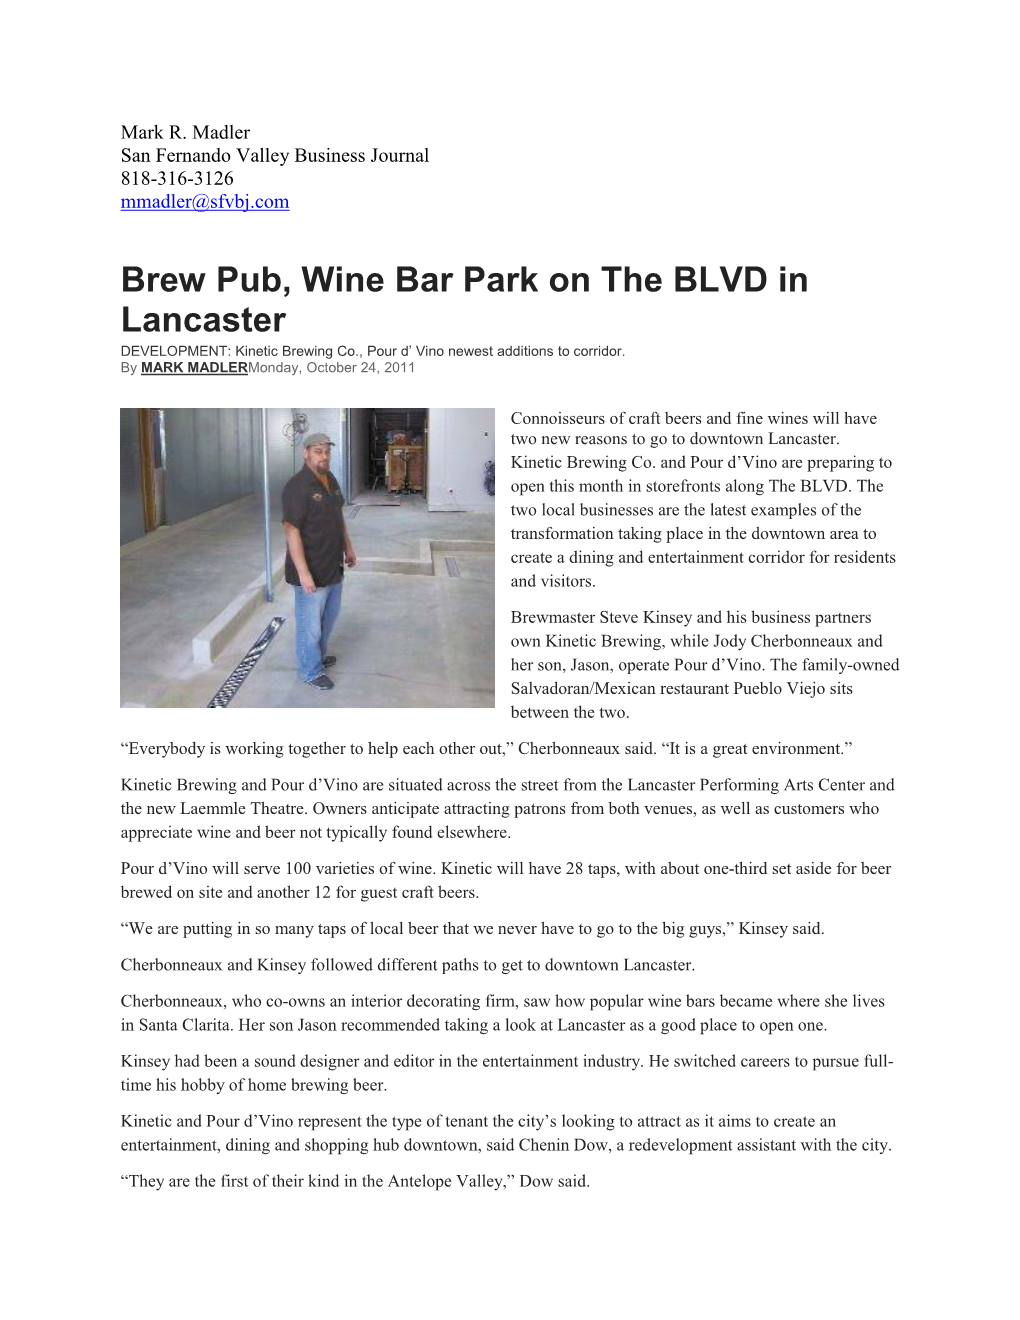 Brew Pub, Wine Bar Park on the BLVD in Lancaster DEVELOPMENT: Kinetic Brewing Co., Pour D’ Vino Newest Additions to Corridor